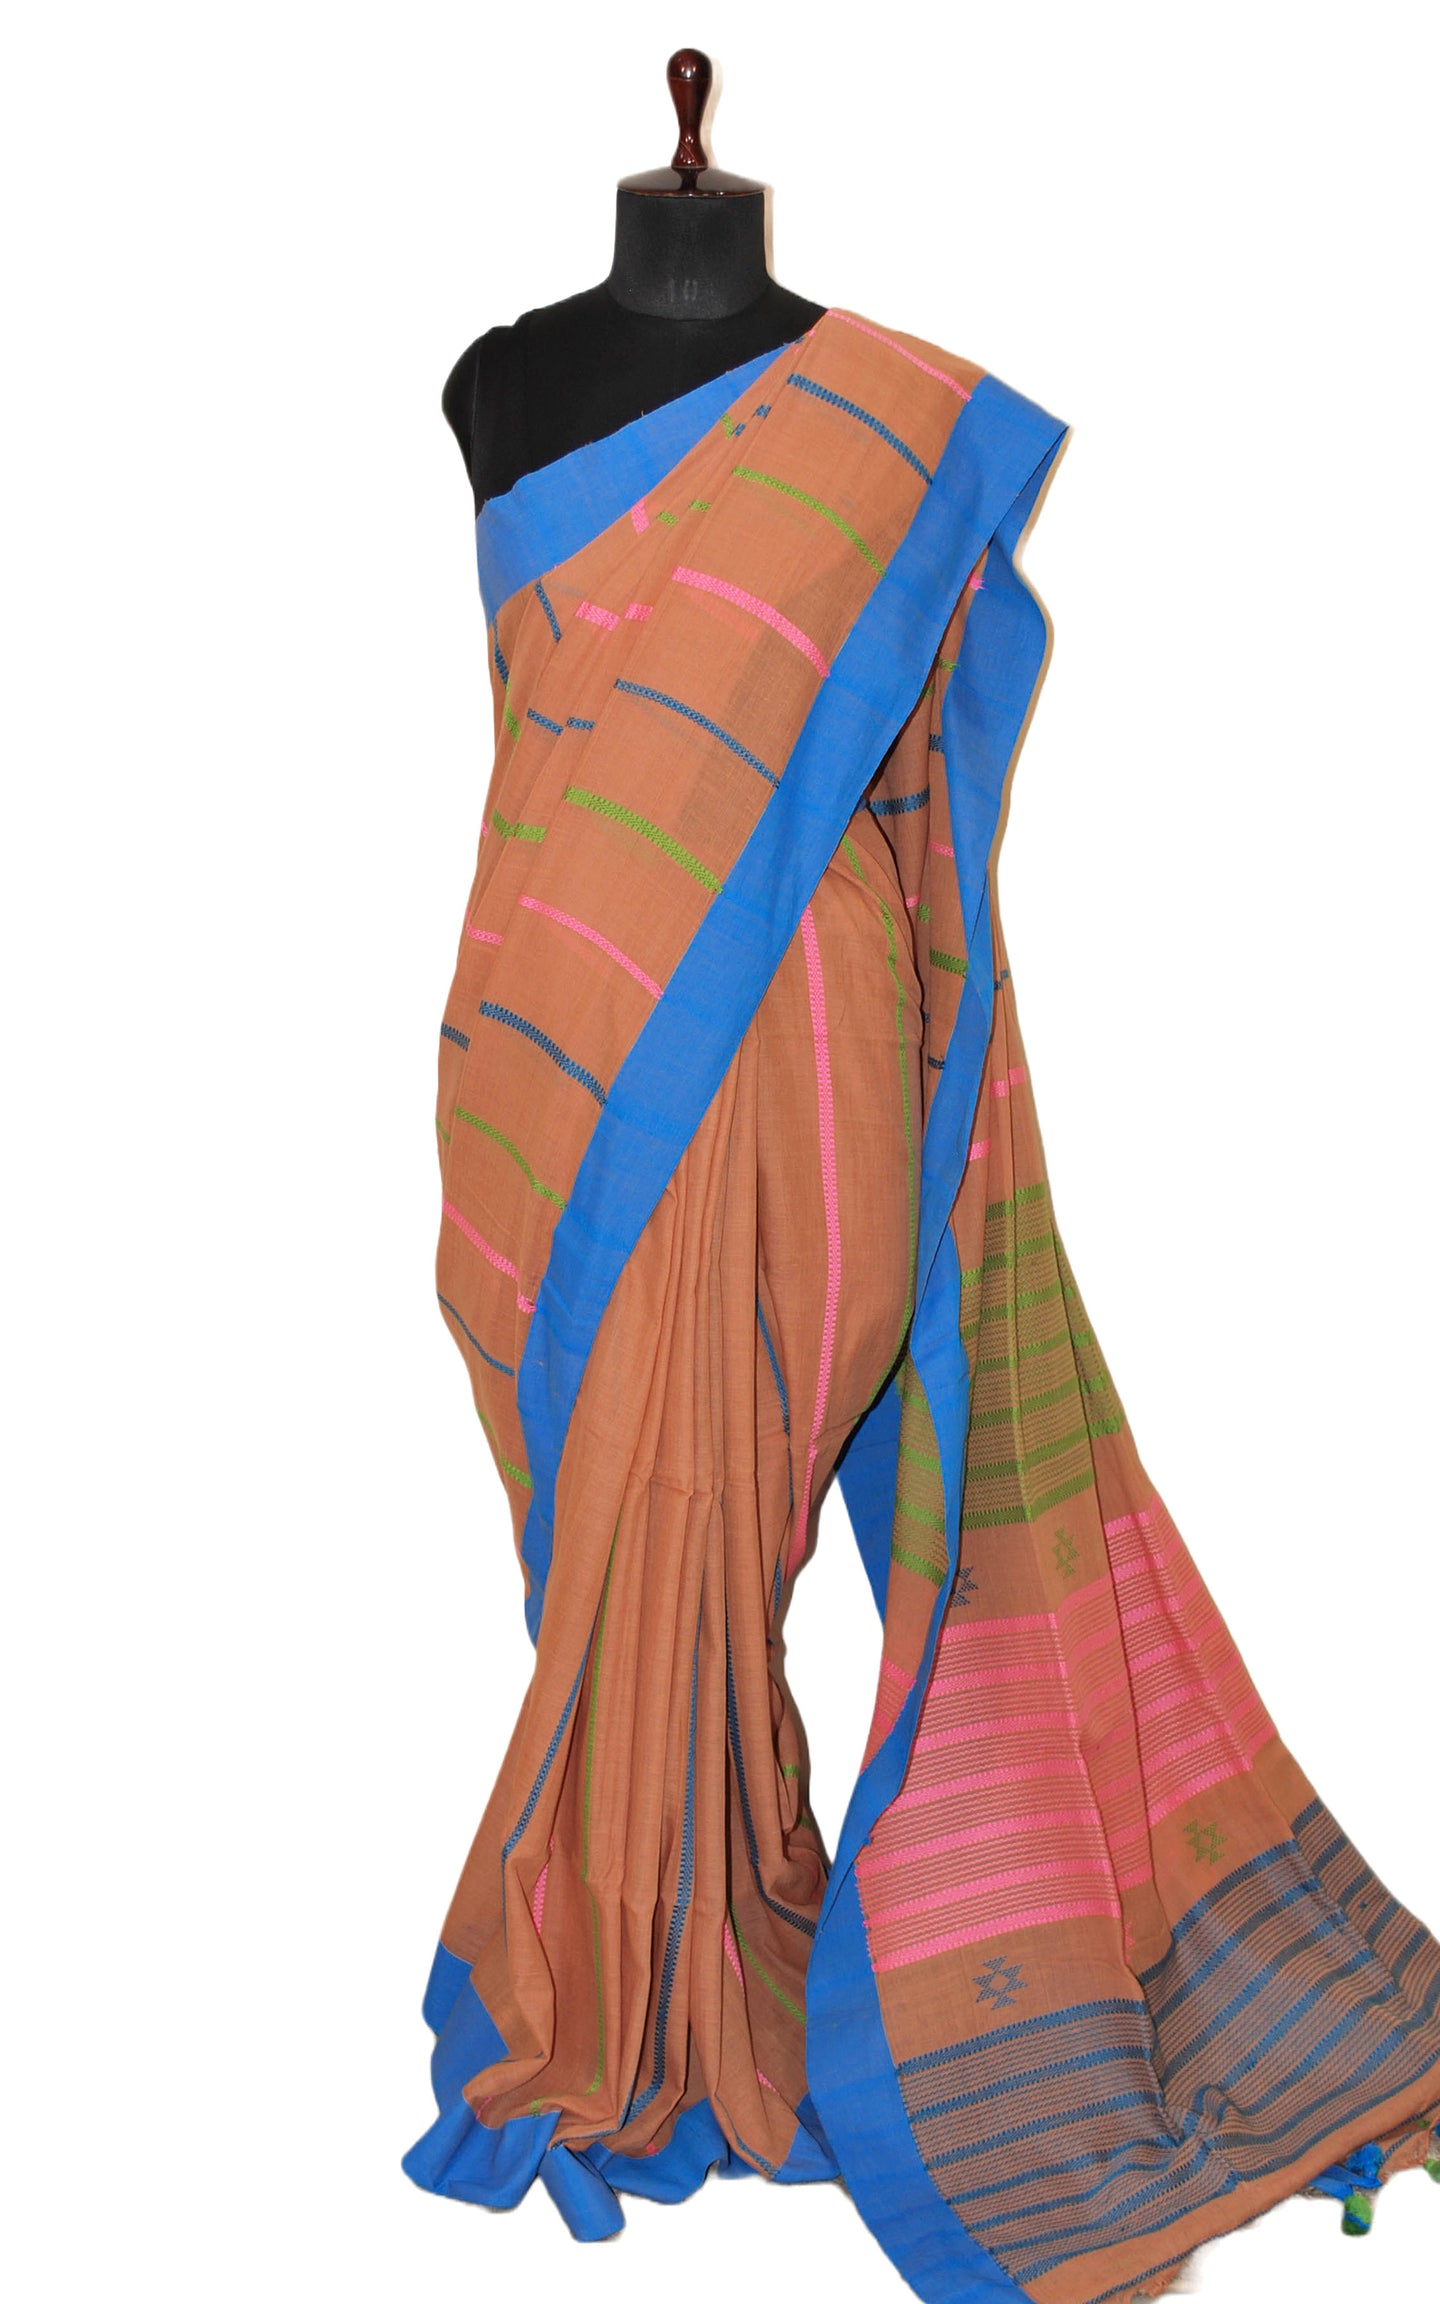 Pure Cotton Kalakshetra Saree in Almond Brown, Azure Blue, Light Pink and Green